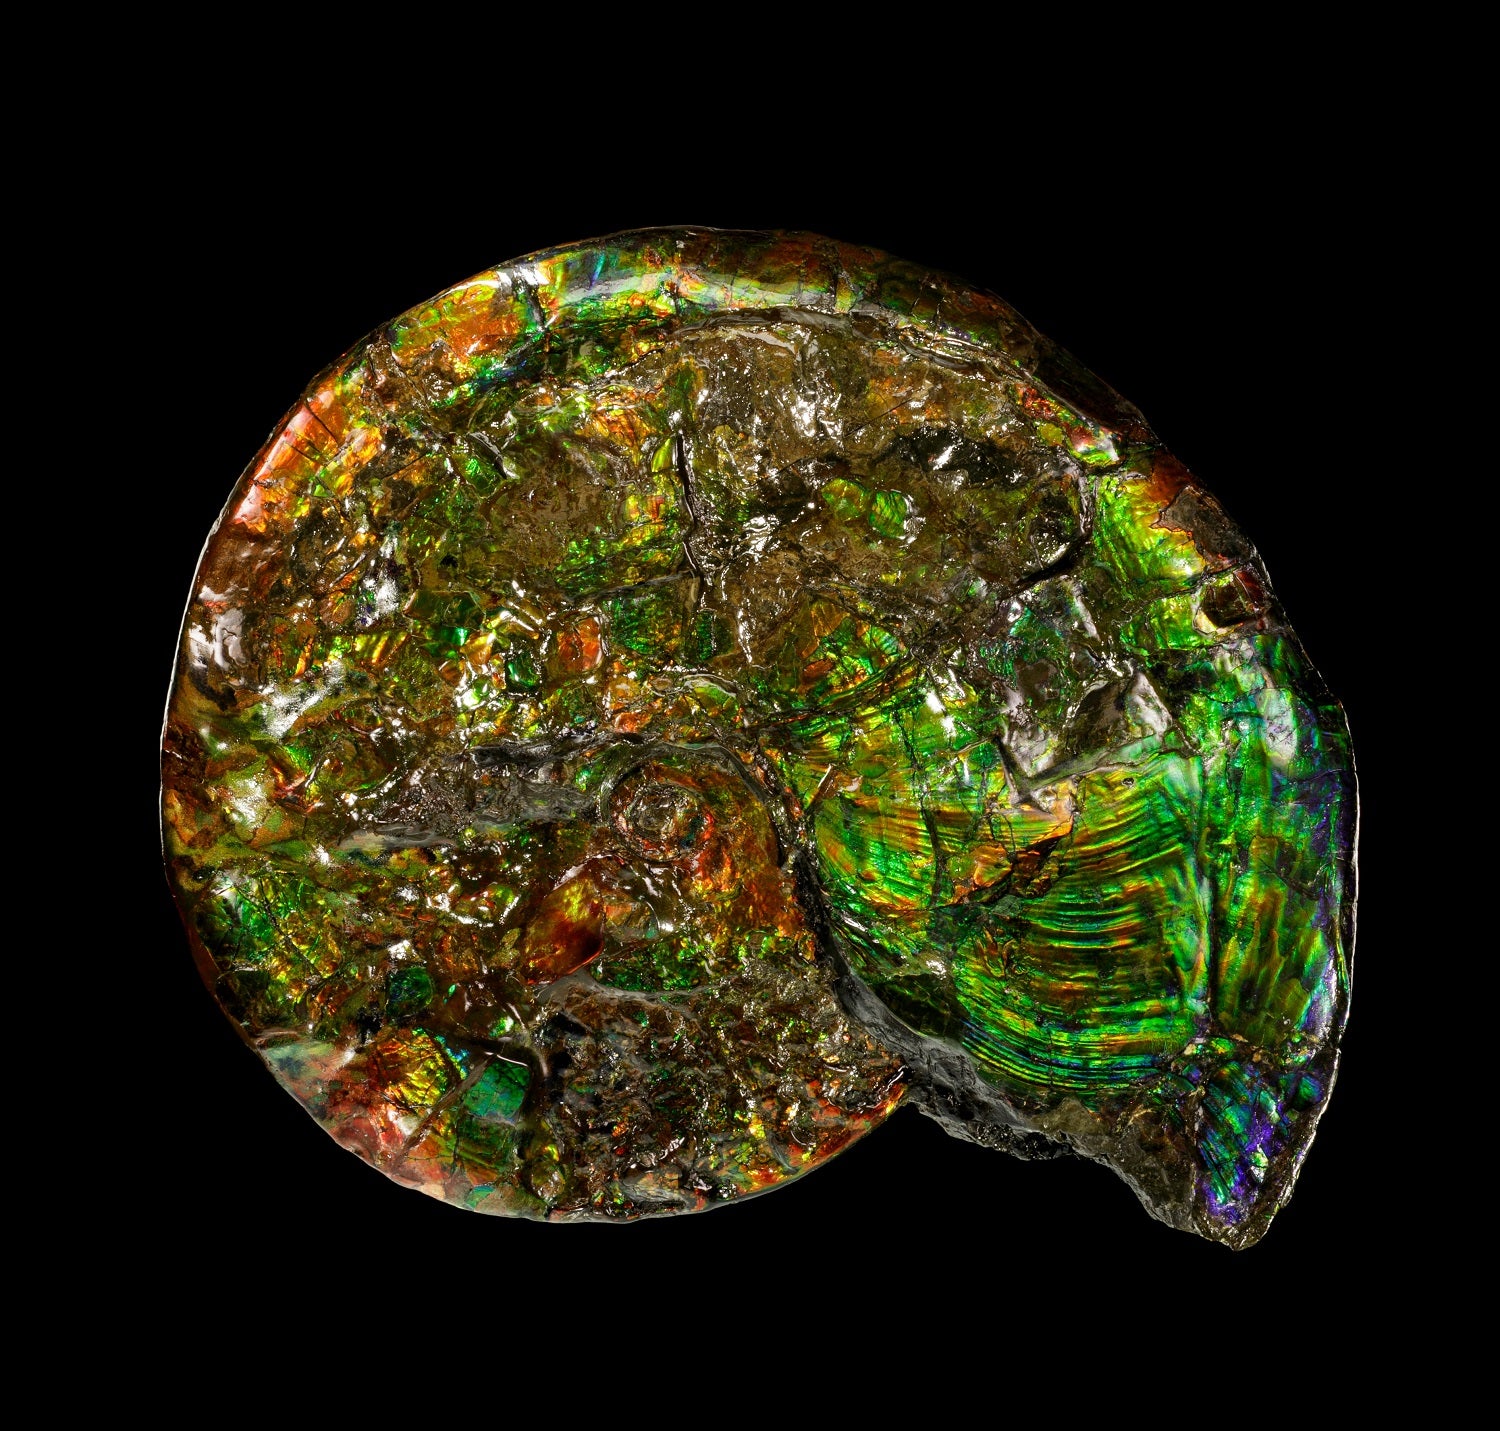 Iridescent opalized ammonite on black in a mineral catalog